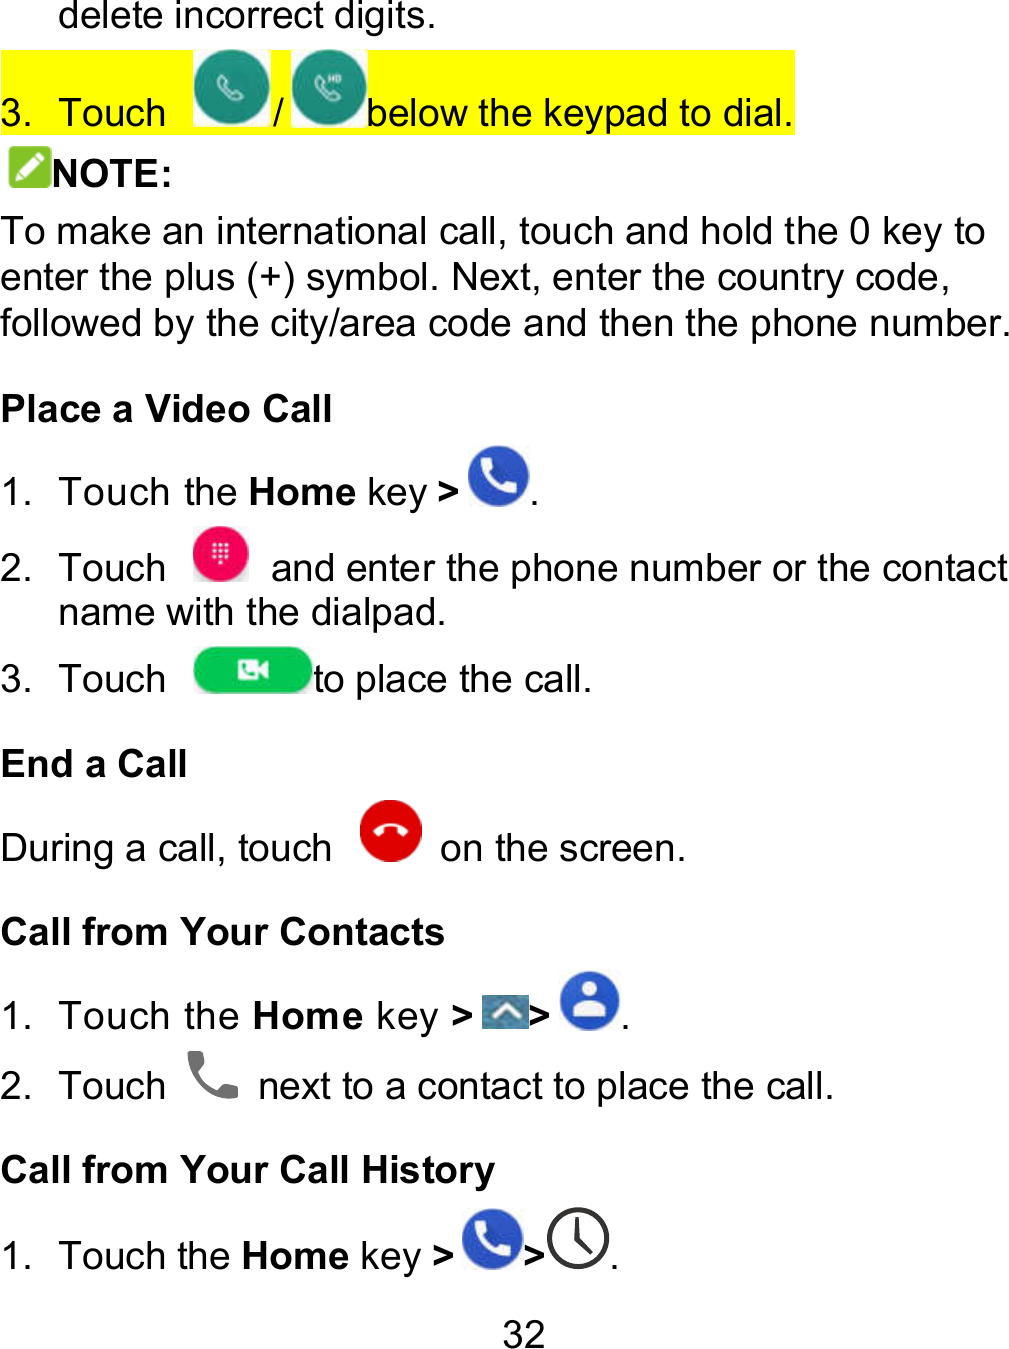 32 delete incorrect digits. 3.  Touch  / below the keypad to dial. NOTE: To make an international call, touch and hold the 0 key to enter the plus (+) symbol. Next, enter the country code, followed by the city/area code and then the phone number. Place a Video Call 1.  Touch the Home key &gt;. 2.  Touch    and enter the phone number or the contact name with the dialpad. 3.  Touch  to place the call. End a Call During a call, touch    on the screen. Call from Your Contacts 1.  Touch the Home key &gt; &gt; . 2.  Touch    next to a contact to place the call. Call from Your Call History 1.  Touch the Home key &gt; &gt; . 